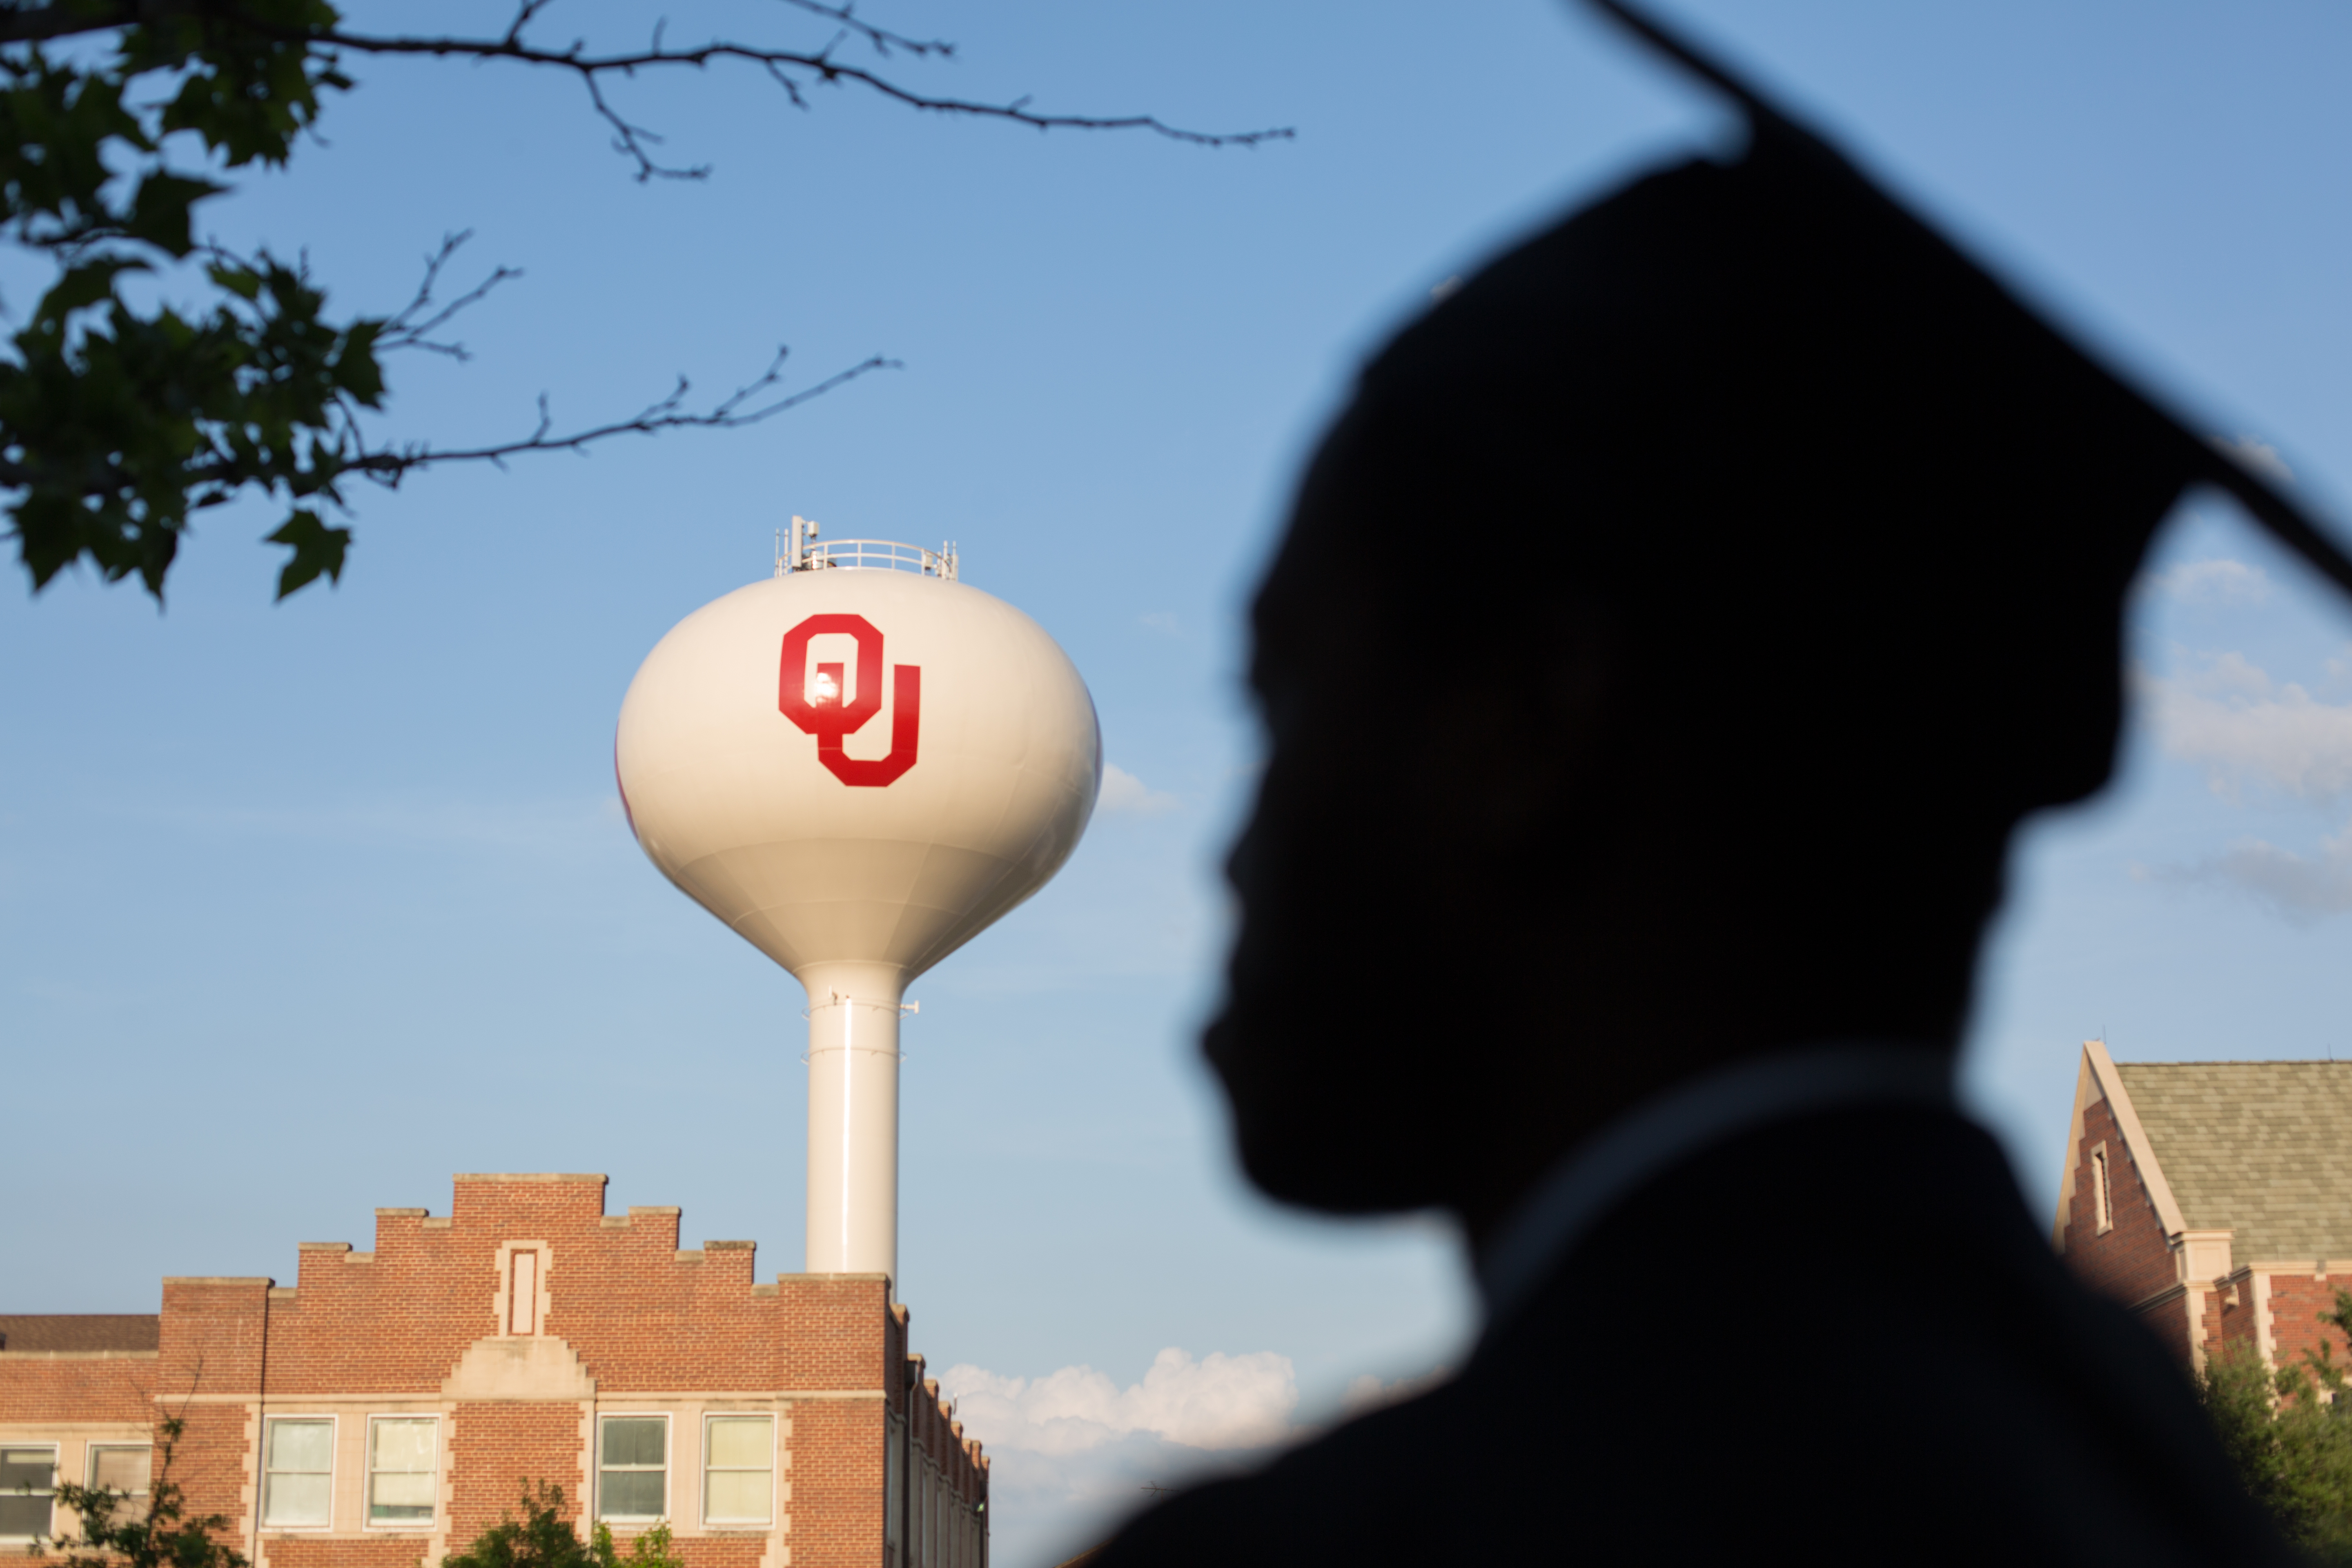 Student with cap by OU water tower